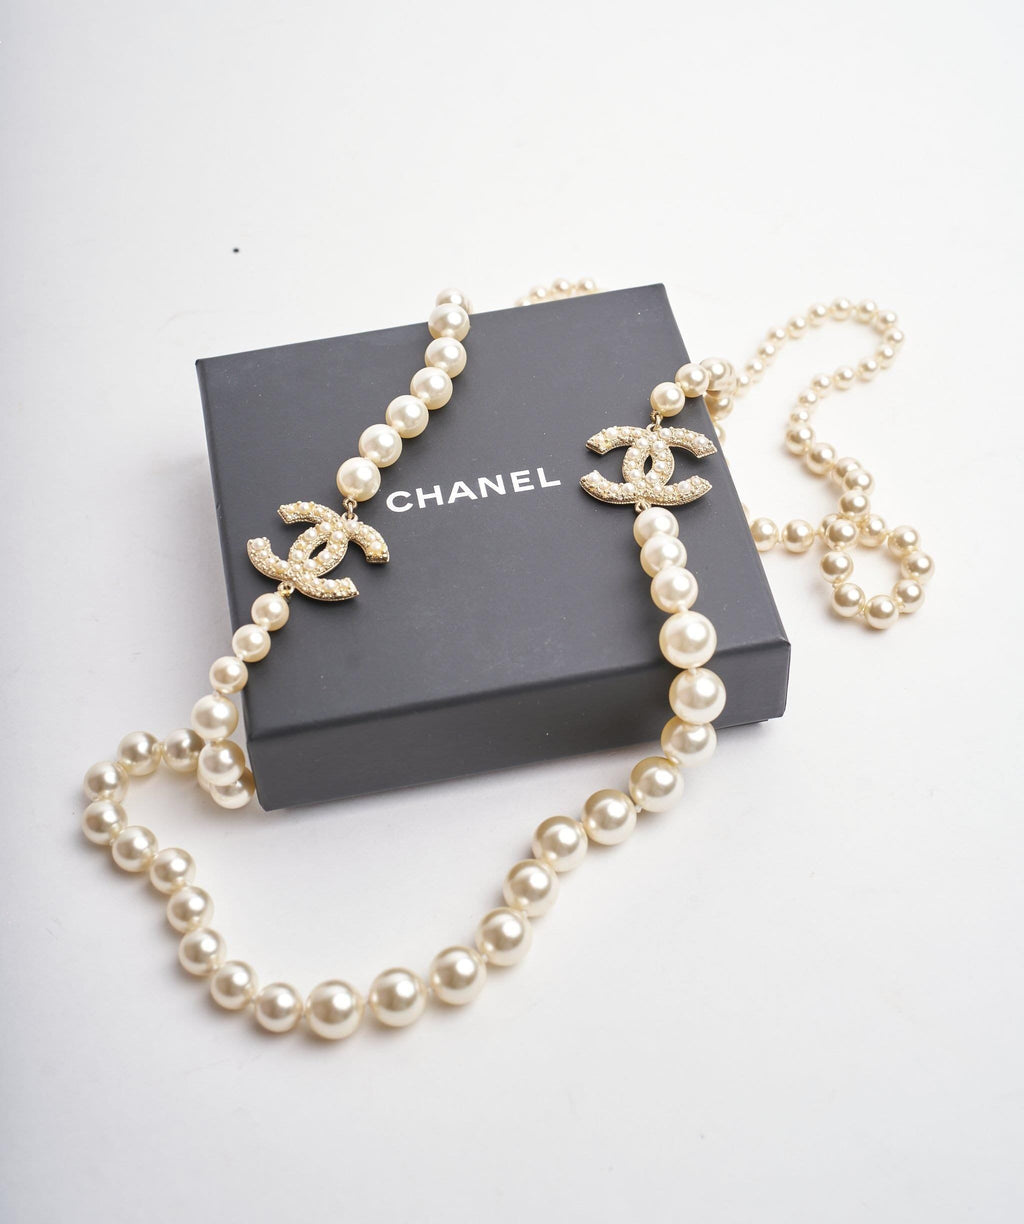 CHANEL Necklace AUTH Coco Mark Logo Chain Vintage Rare Fake, 59% OFF